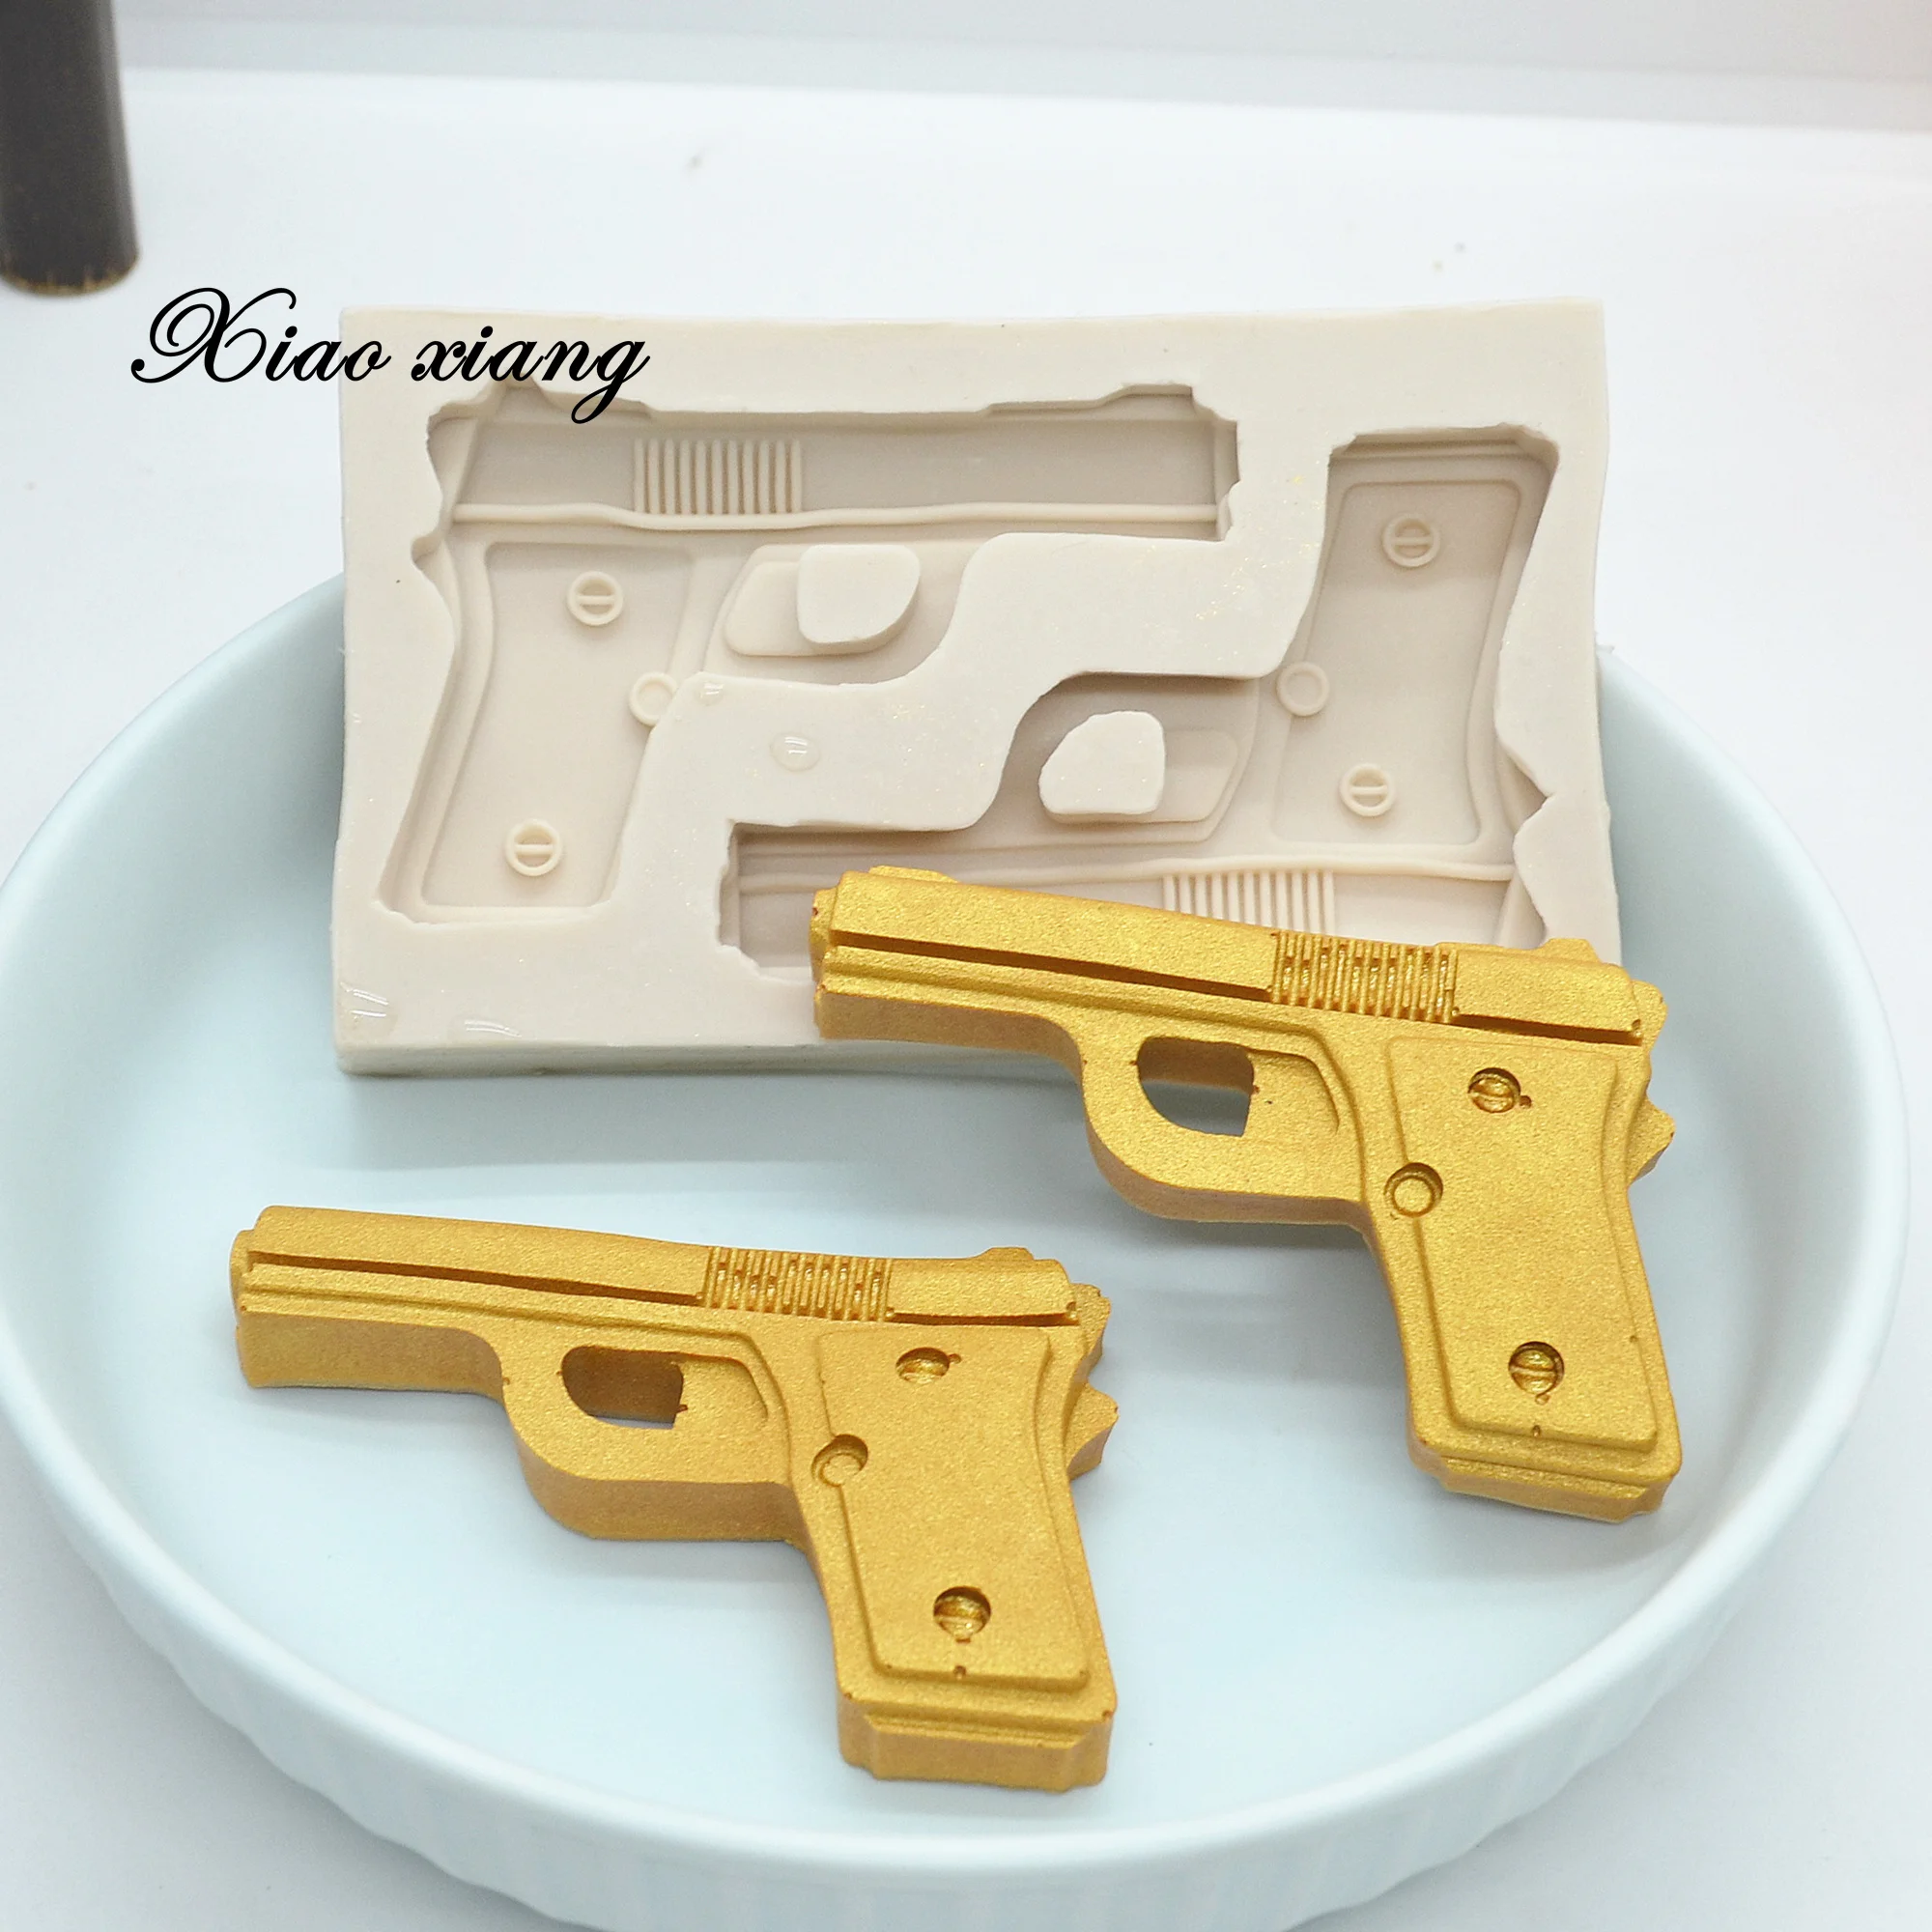 

Luyou 3D Gun Silicone Fondant Cake Molds Chocolate Resin Mold Cake Decorating Tools Kitchen Baking Accessories FM2011